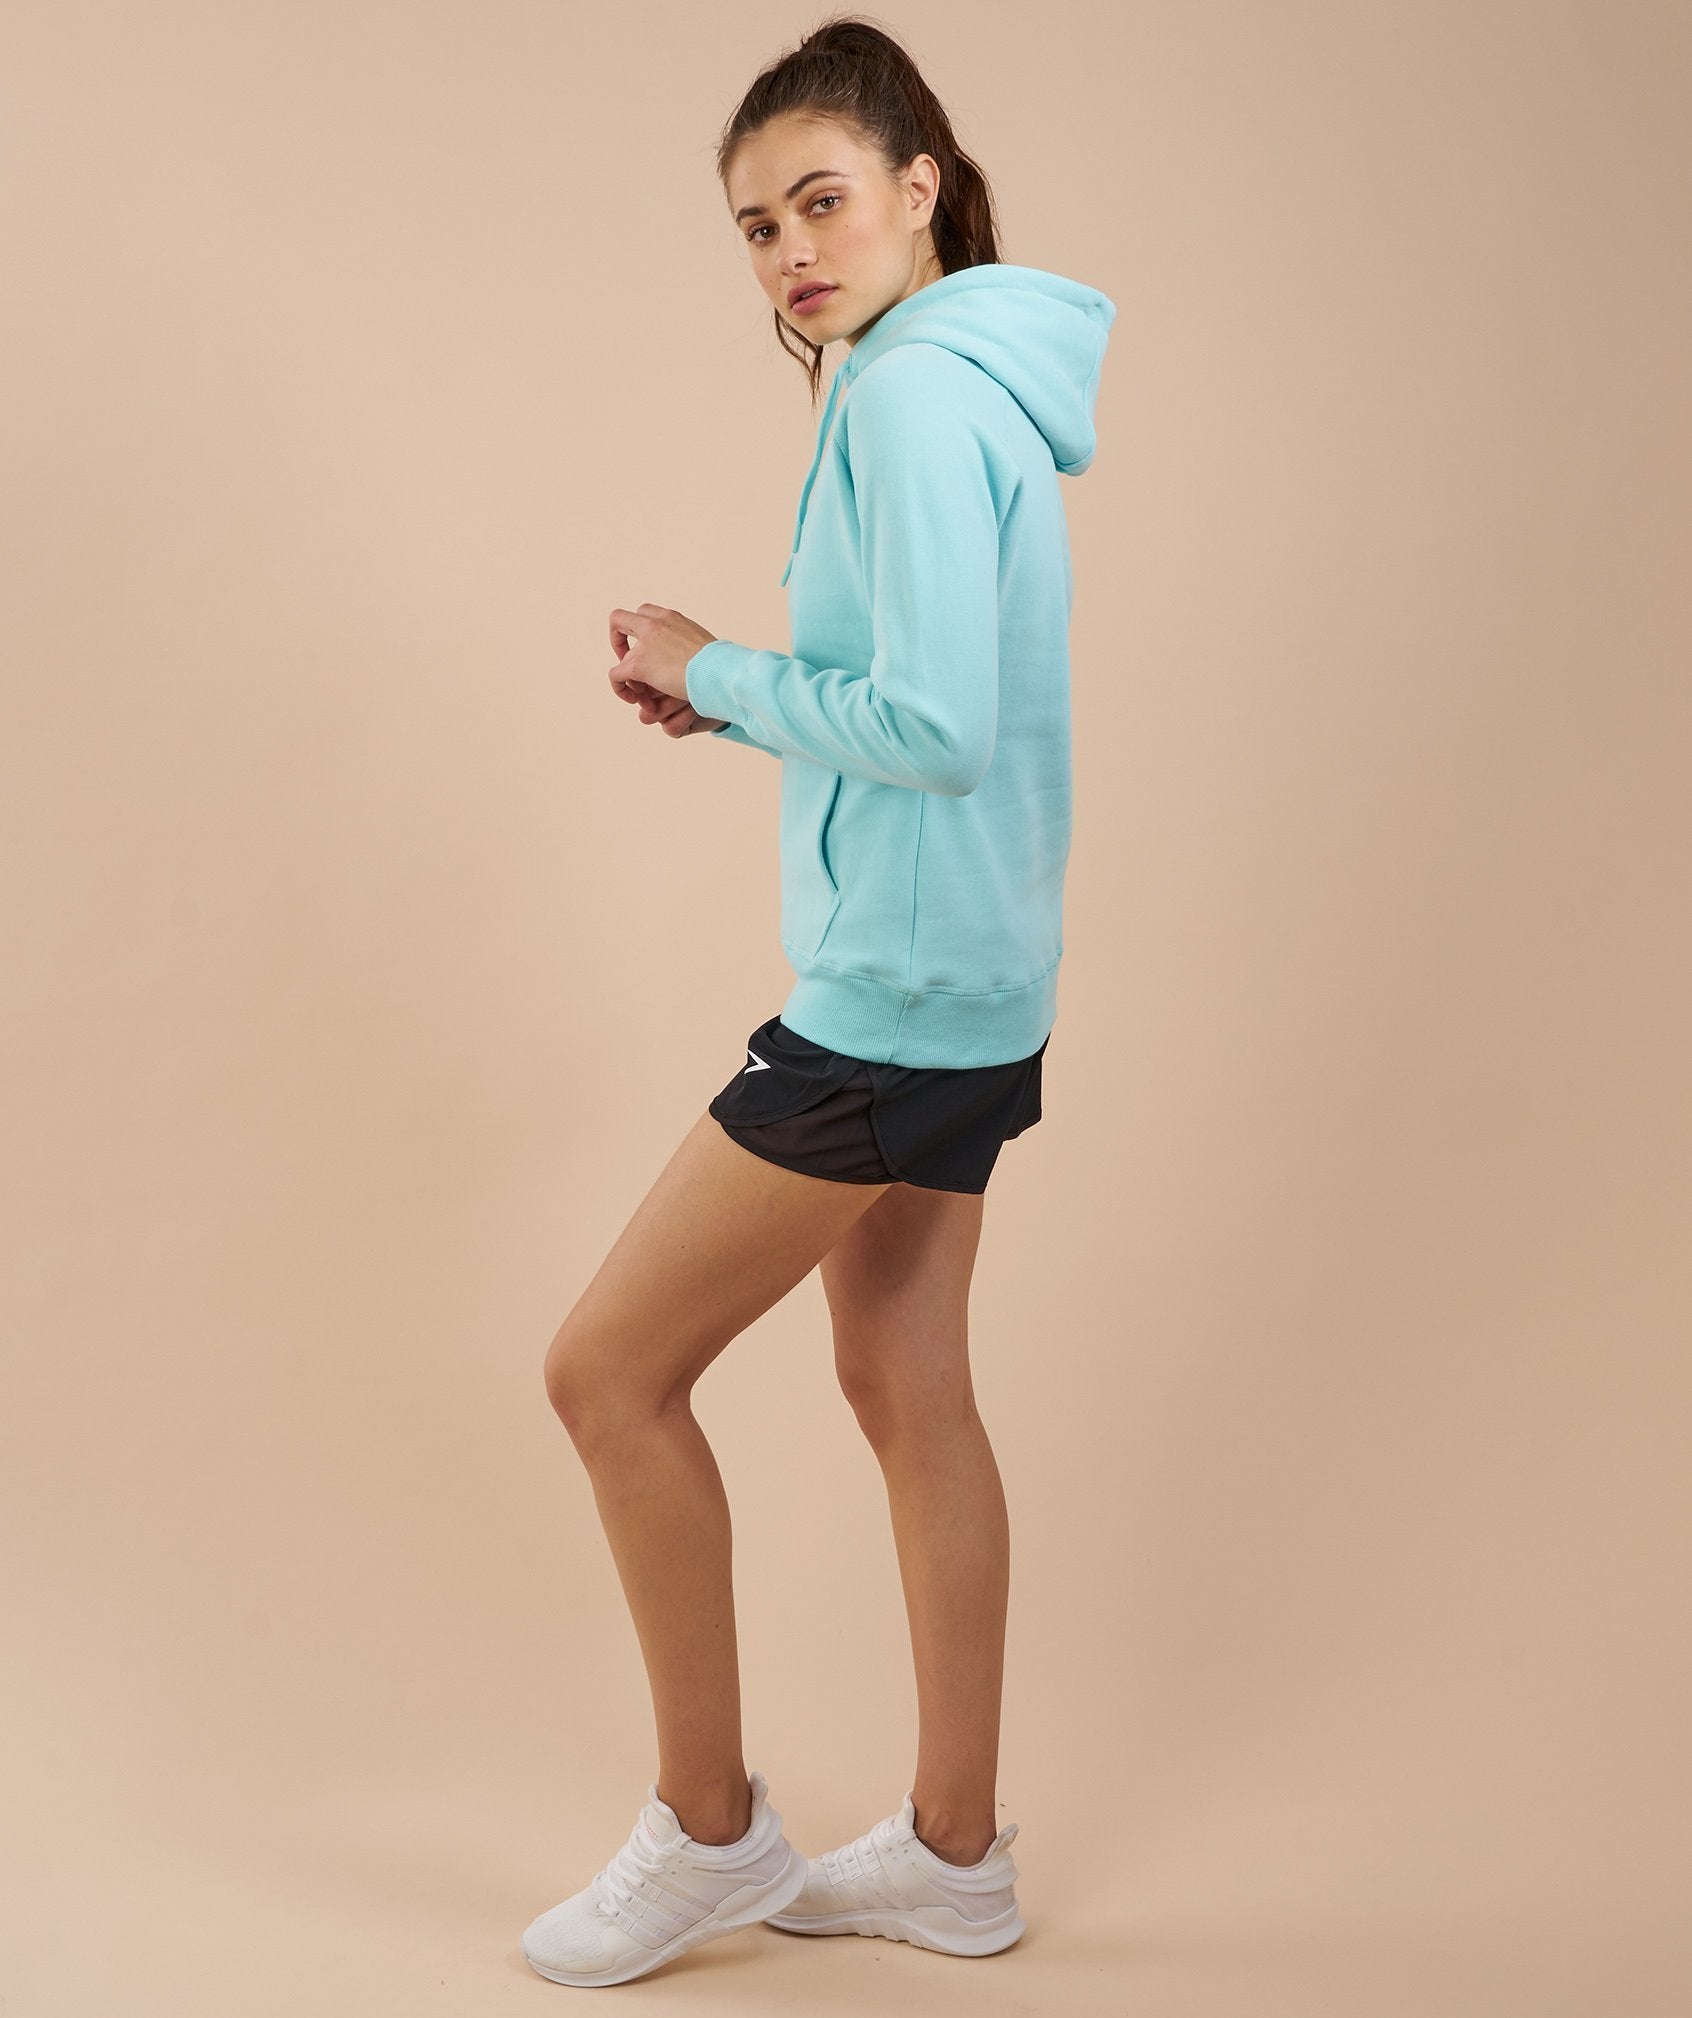 Women's Crest Hoodie in Pale Turquoise - view 3